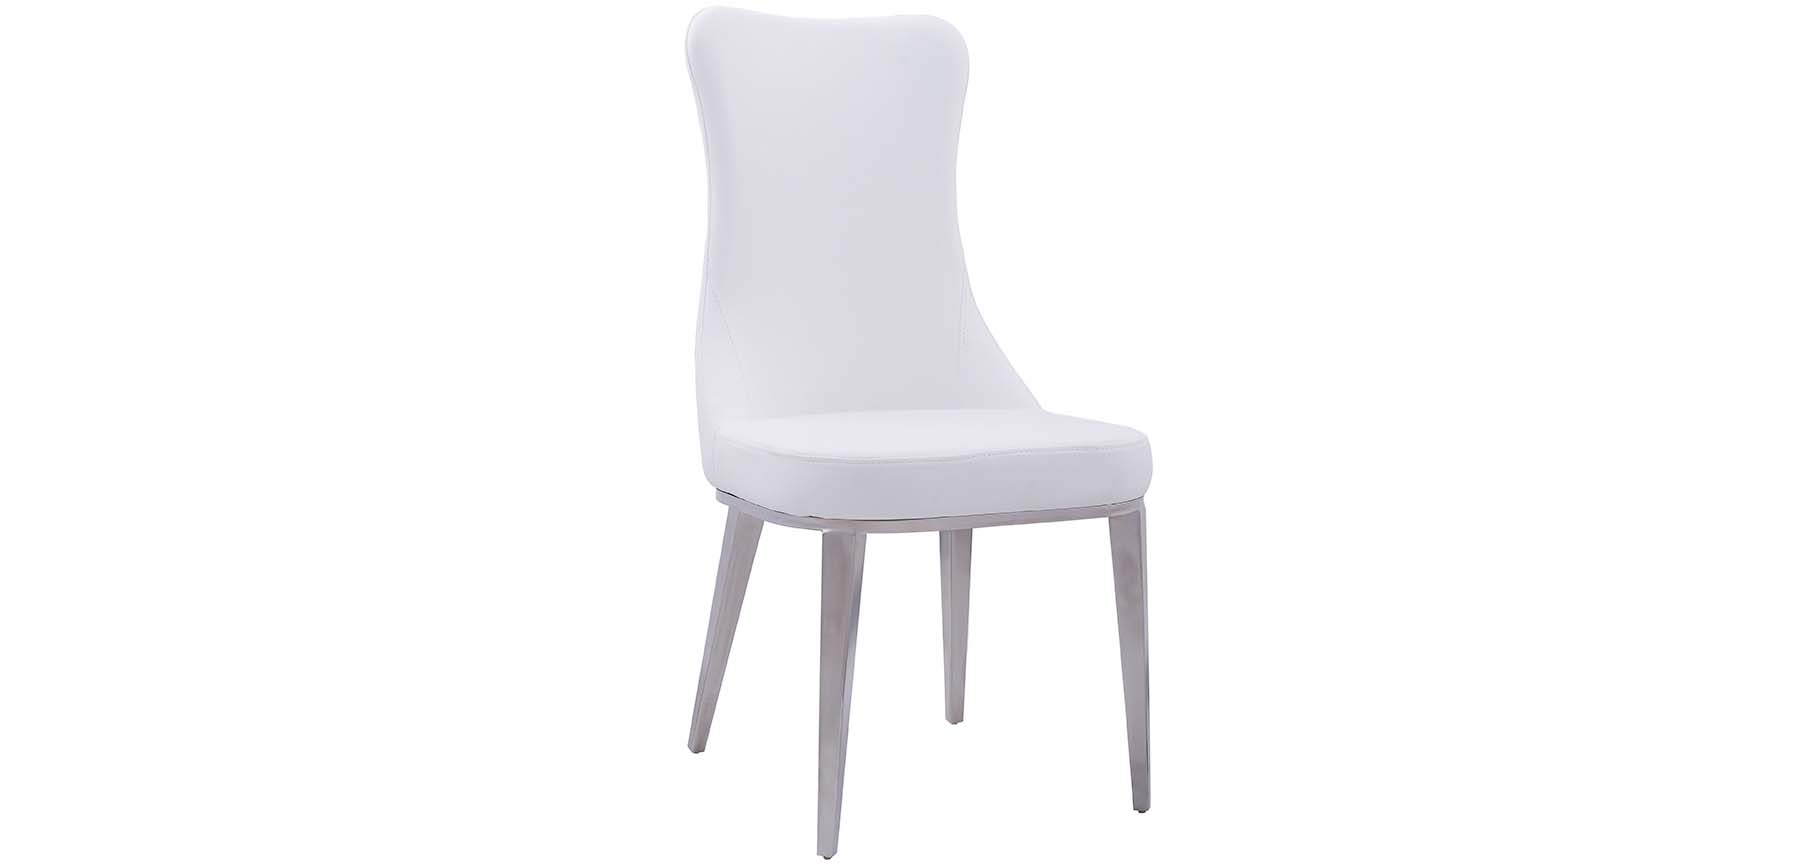 Dining Room Furniture Kitchen Tables and Chairs Sets 6138 Solid White (no pattern) Chair